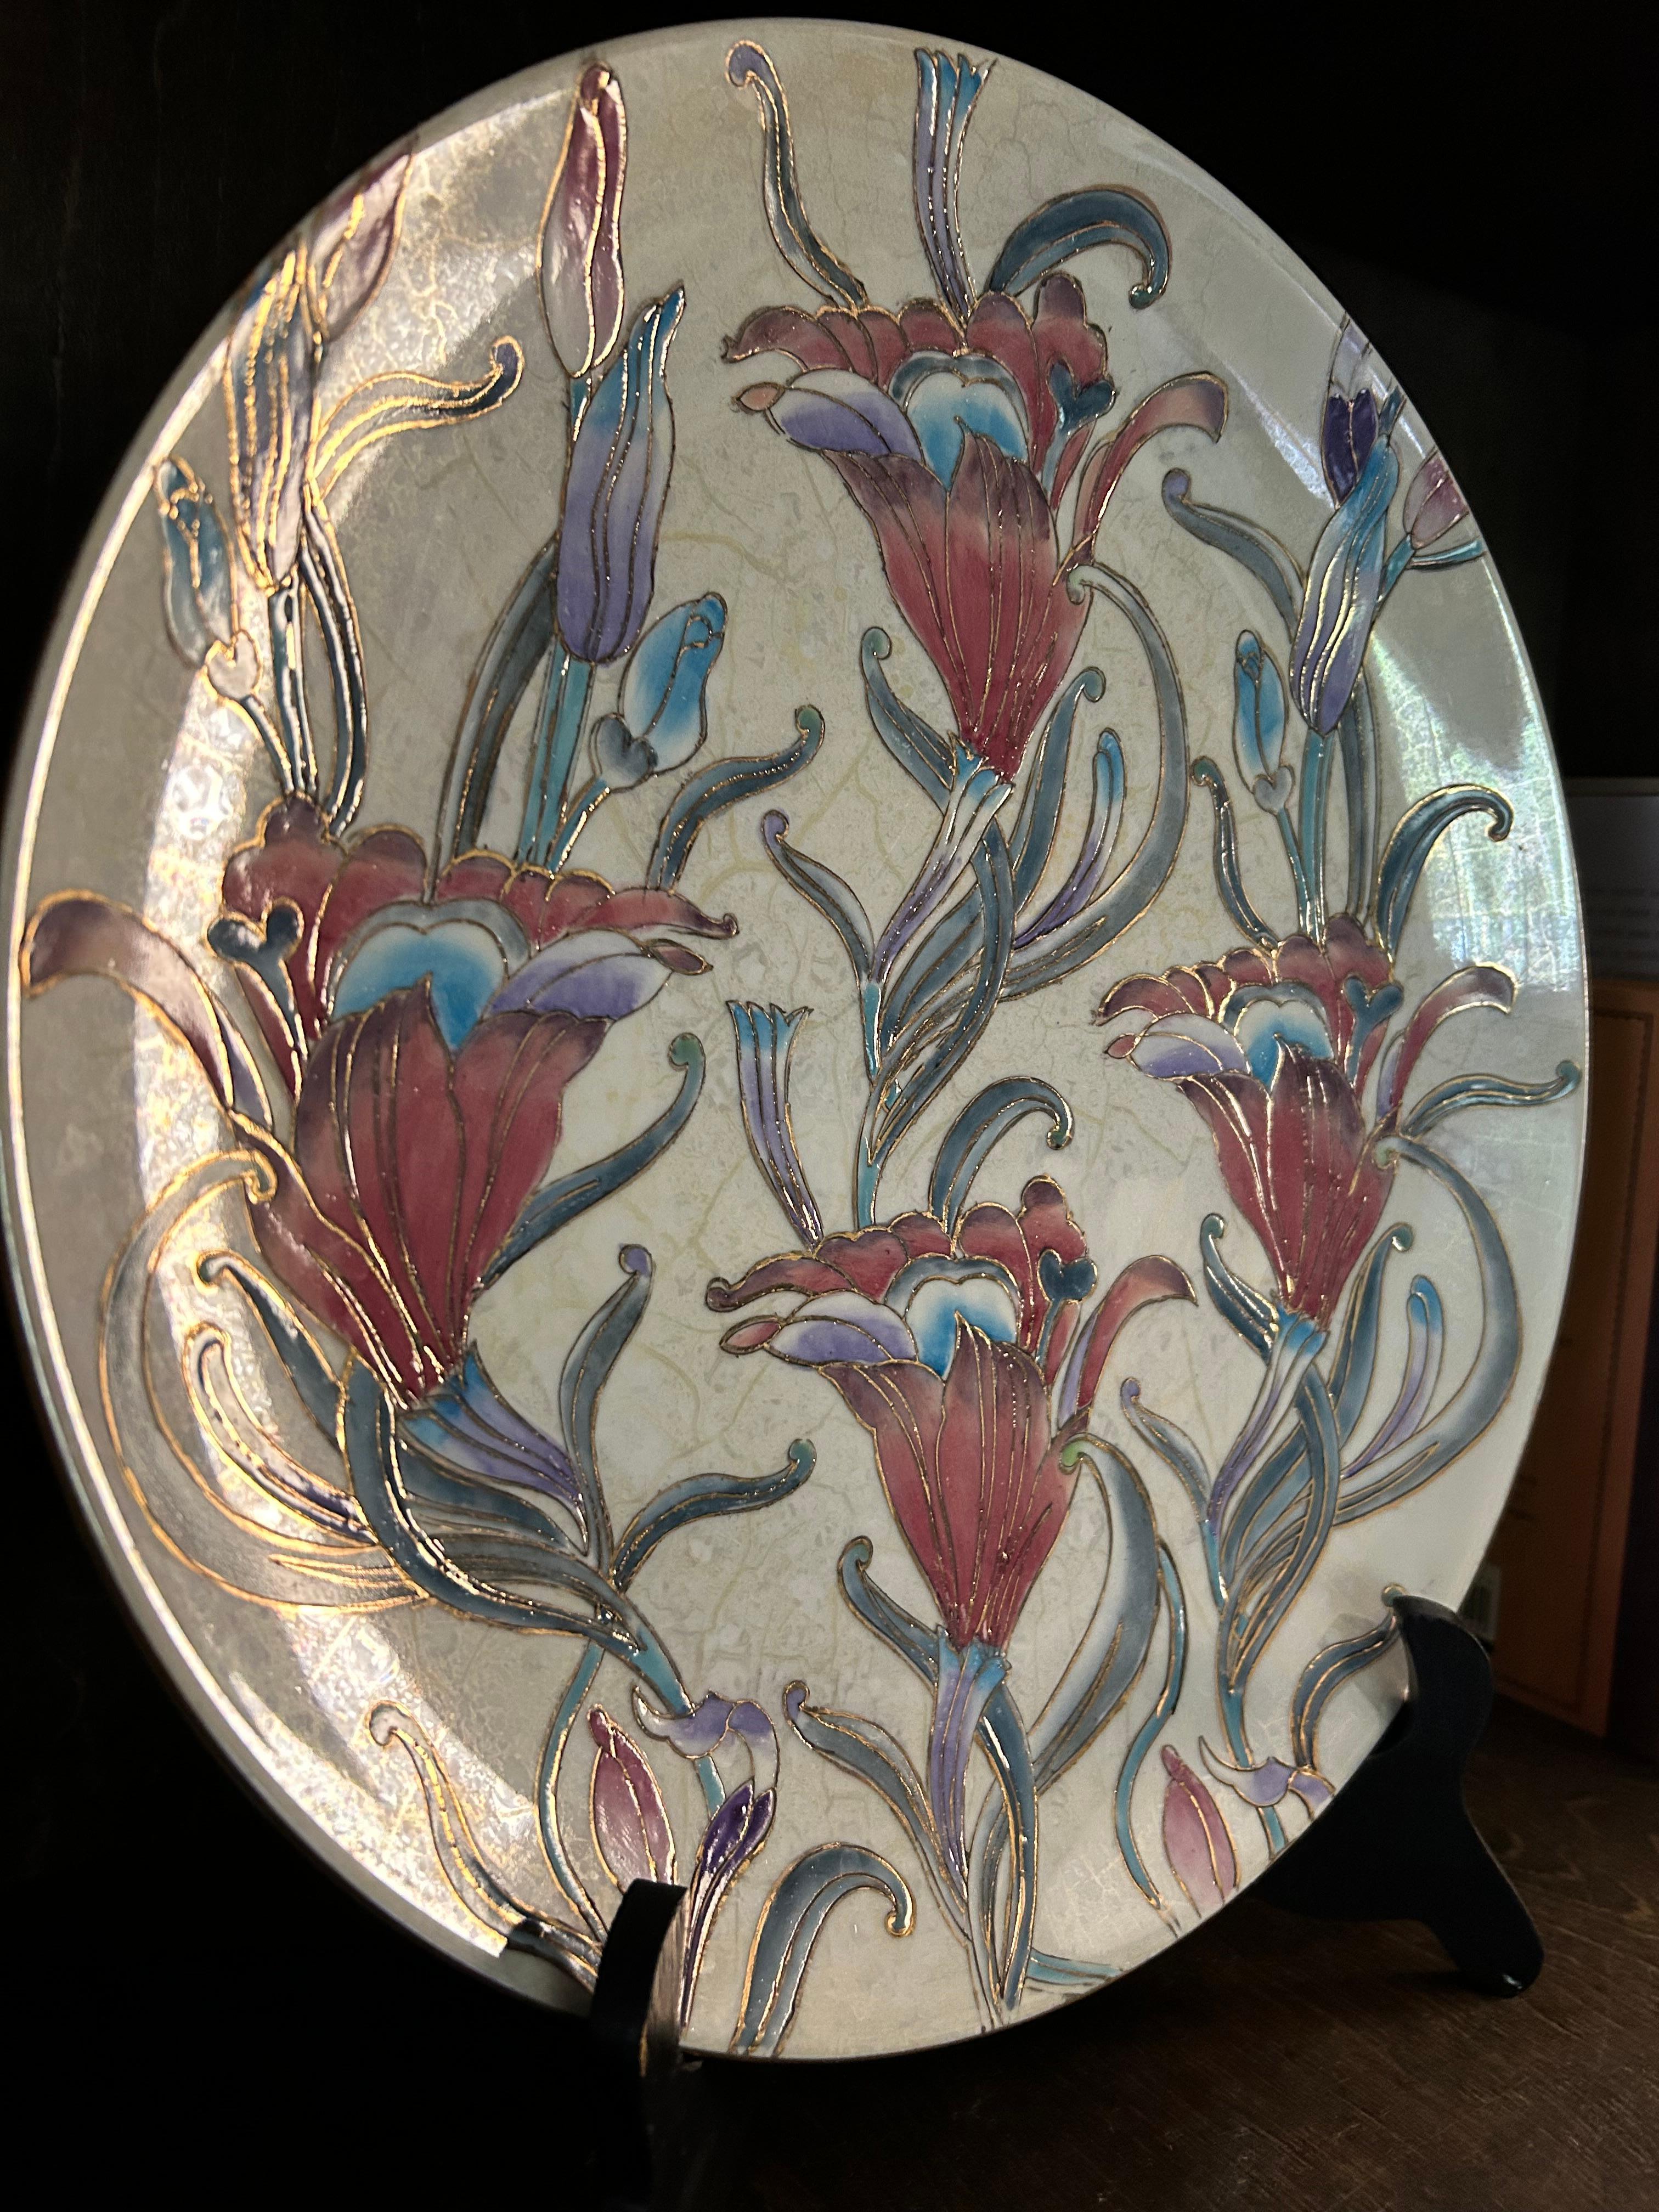 Beautiful Vintage Toyo Hand Painted Floral procelain Decorative Large Plate. It does come with a stand. This piece is only for decorative purposes. It has been kept in really good condition, there are no breaks or chips. See pictures. Add this to